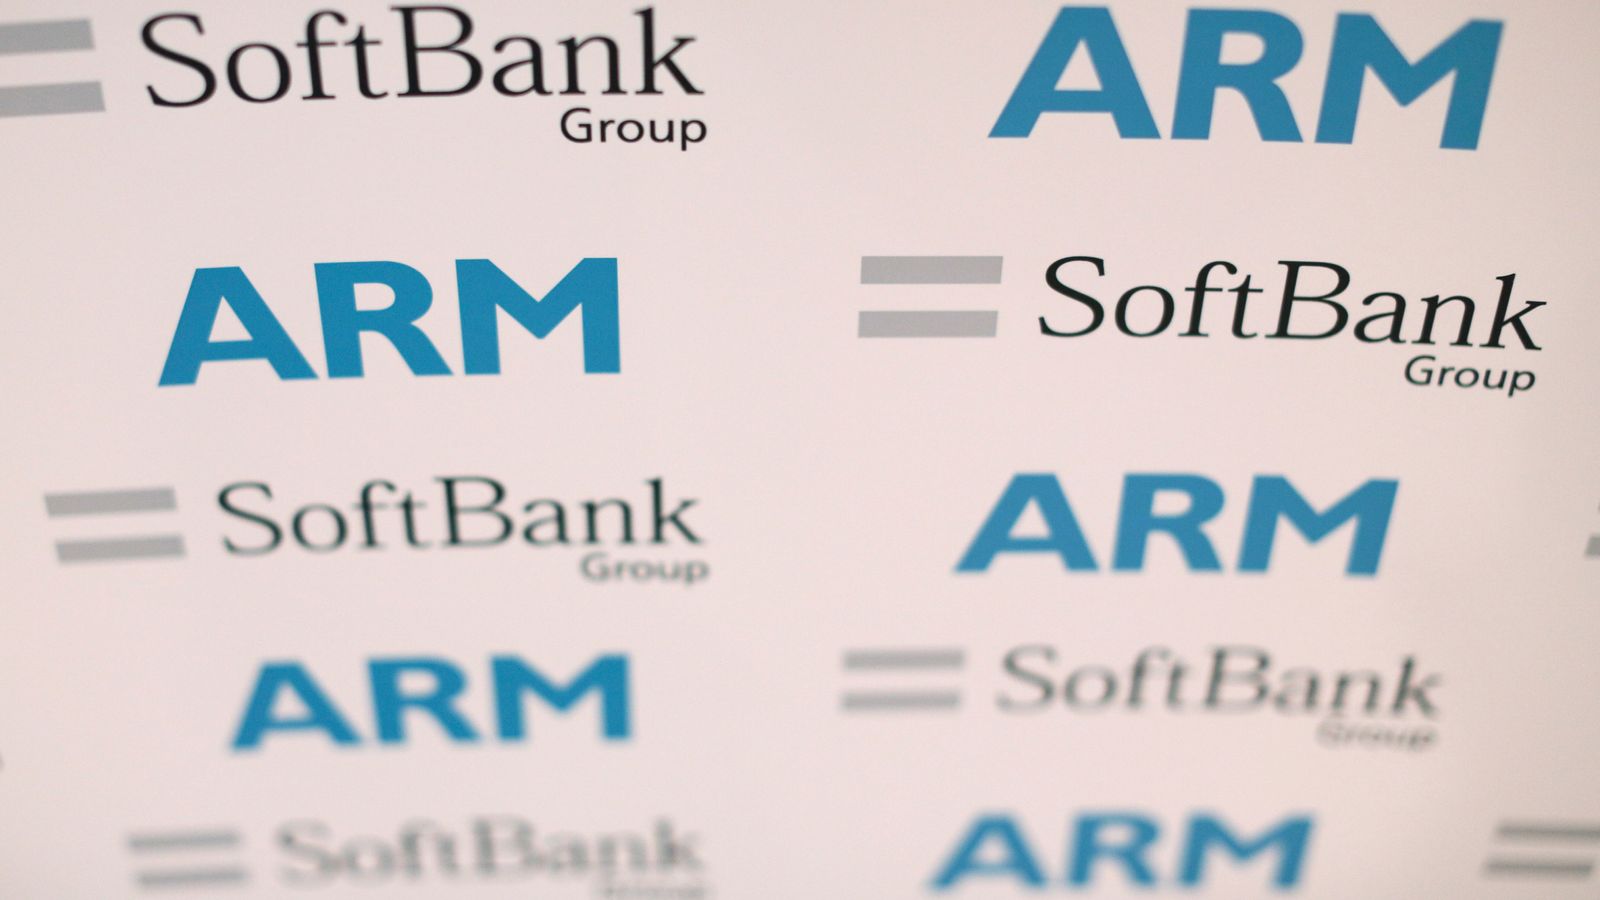 Arm snubs London to float on the New York Stock Exchange despite PM's efforts but announces new Bristol site